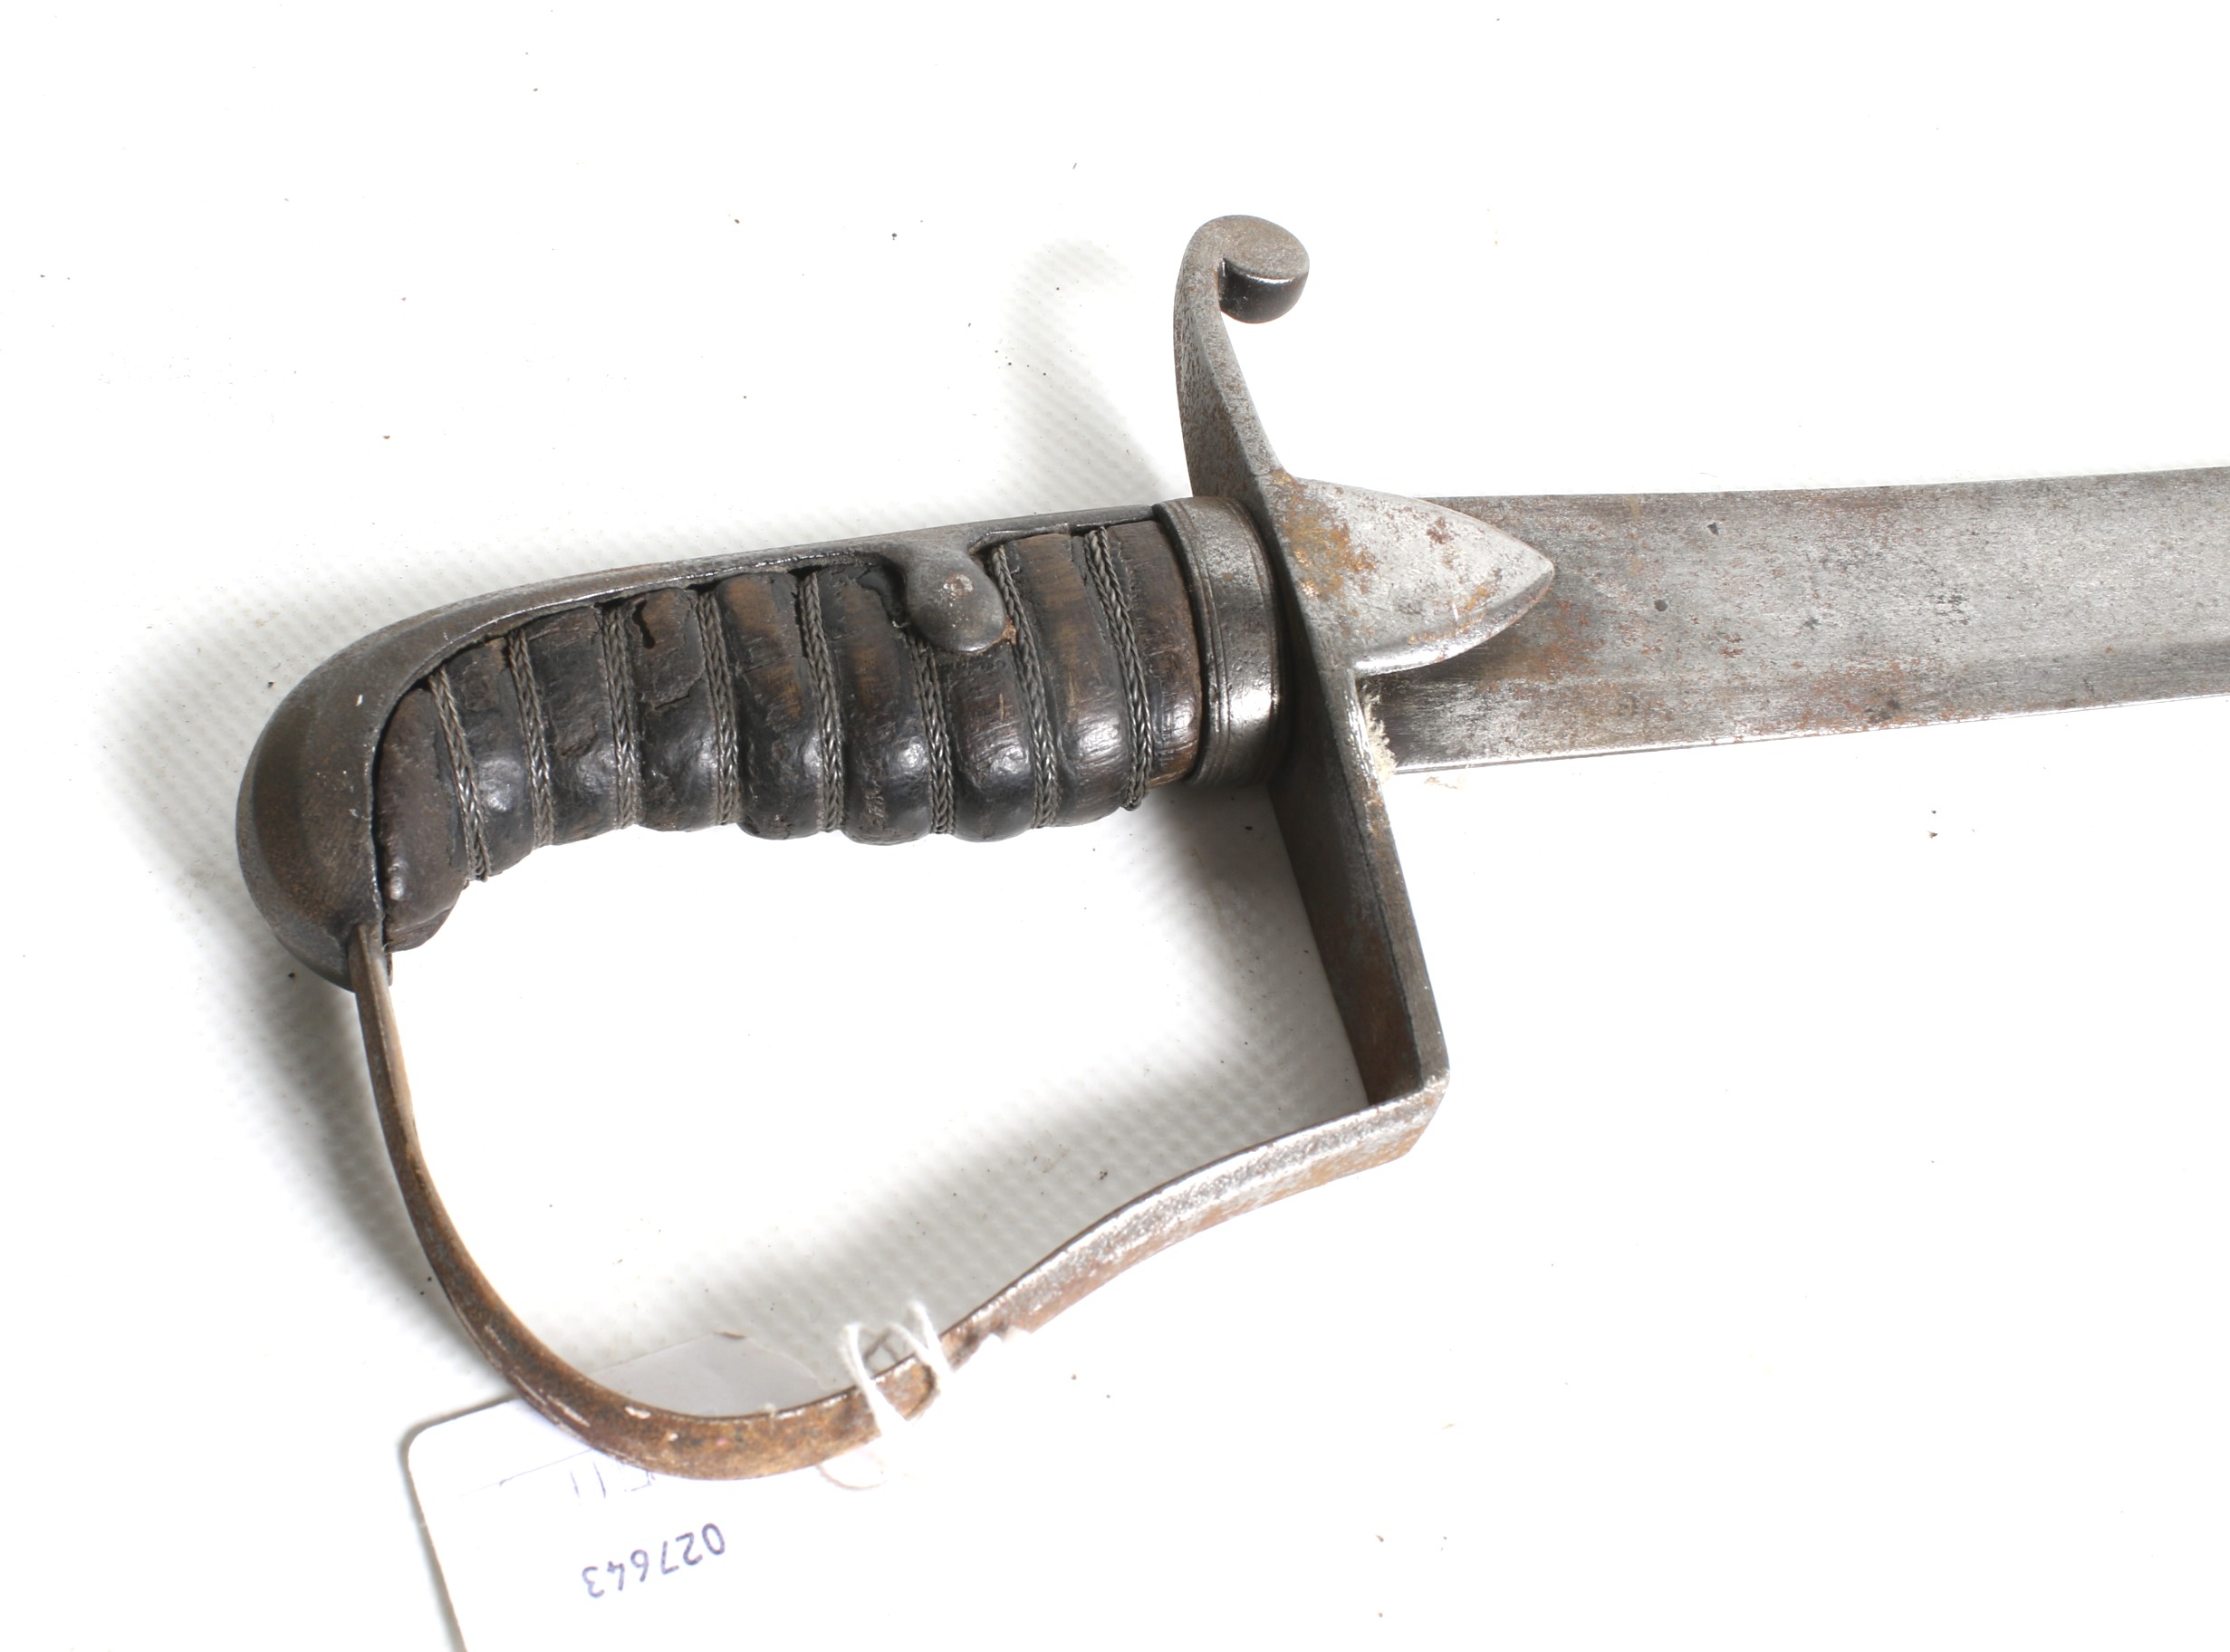 A possibly Napoleonic period British 1796 pattern cavalry sword. - Image 3 of 3